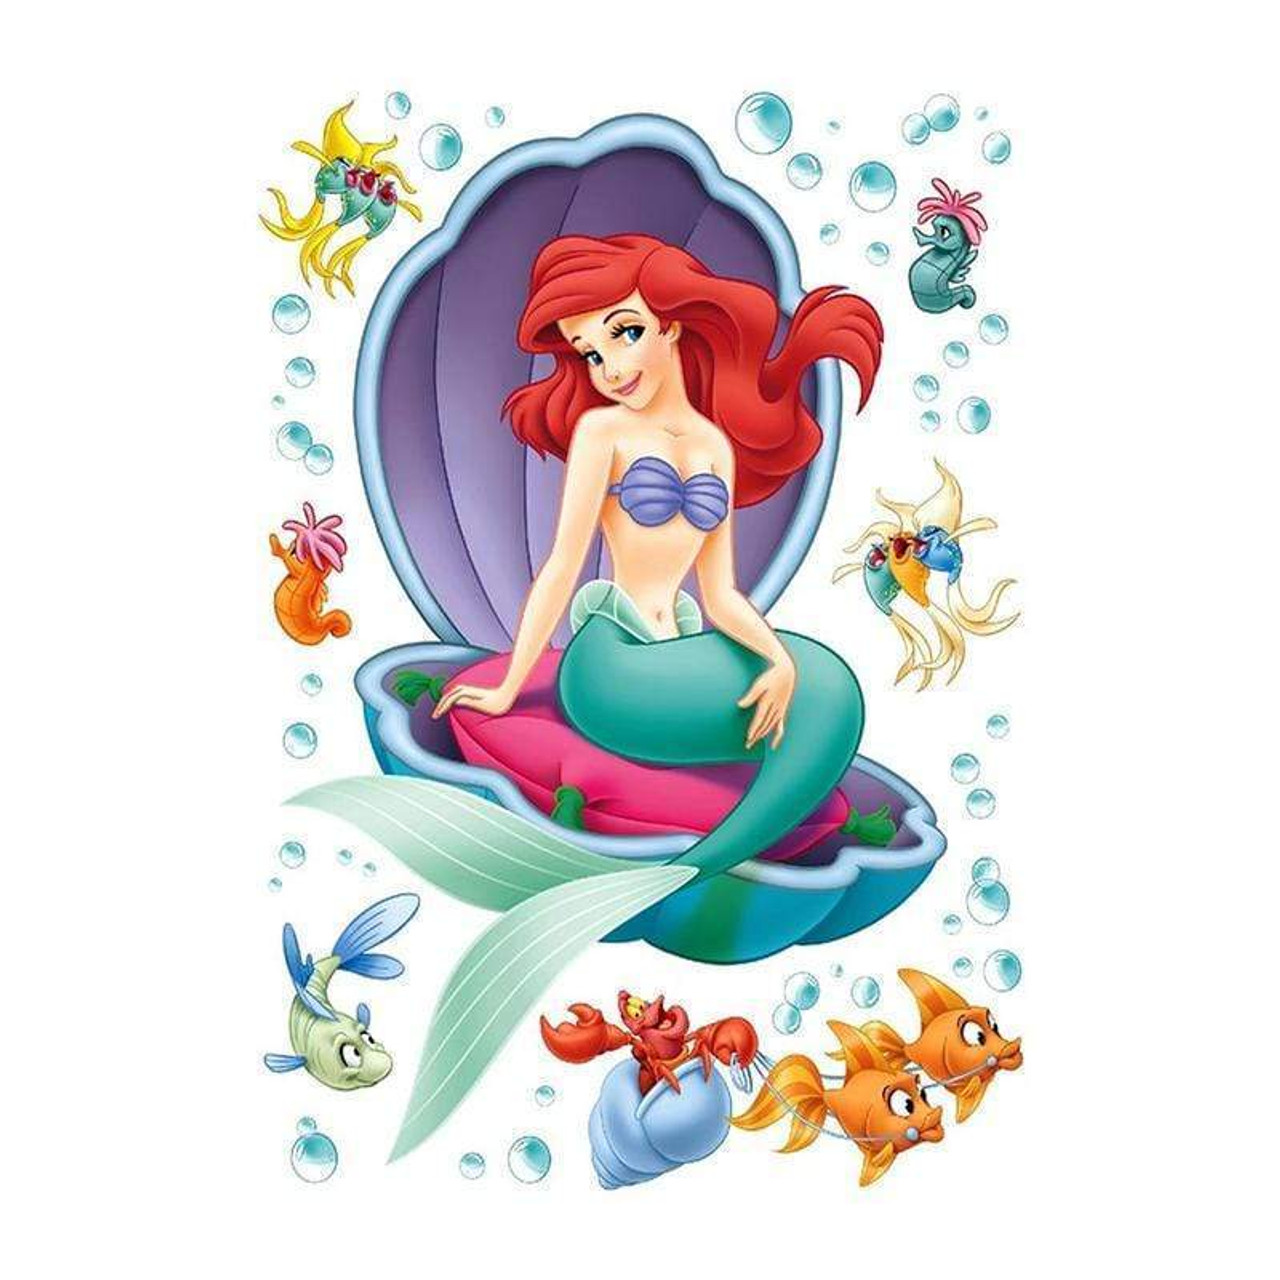 https://cdn11.bigcommerce.com/s-xf1j2e32mt/images/stencil/1280x1280/products/1415/839/5d-diamond-painting-ariel-in-a-clam-shell-kit-23053842579639__48680.1630509822.jpg?c=1